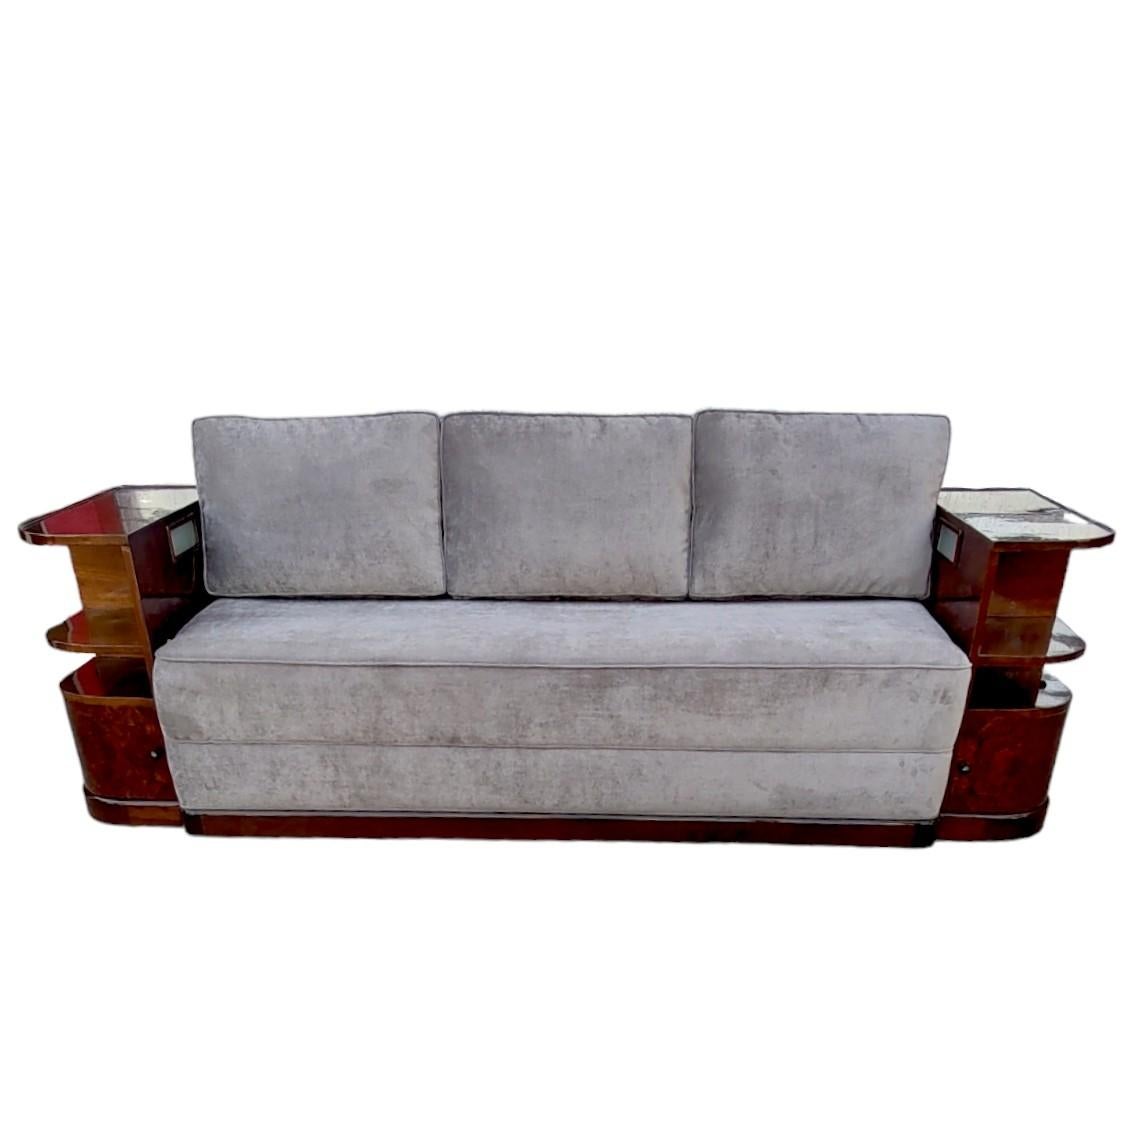 French Art Deco Sofa 1920s with Ligth  For Sale 6